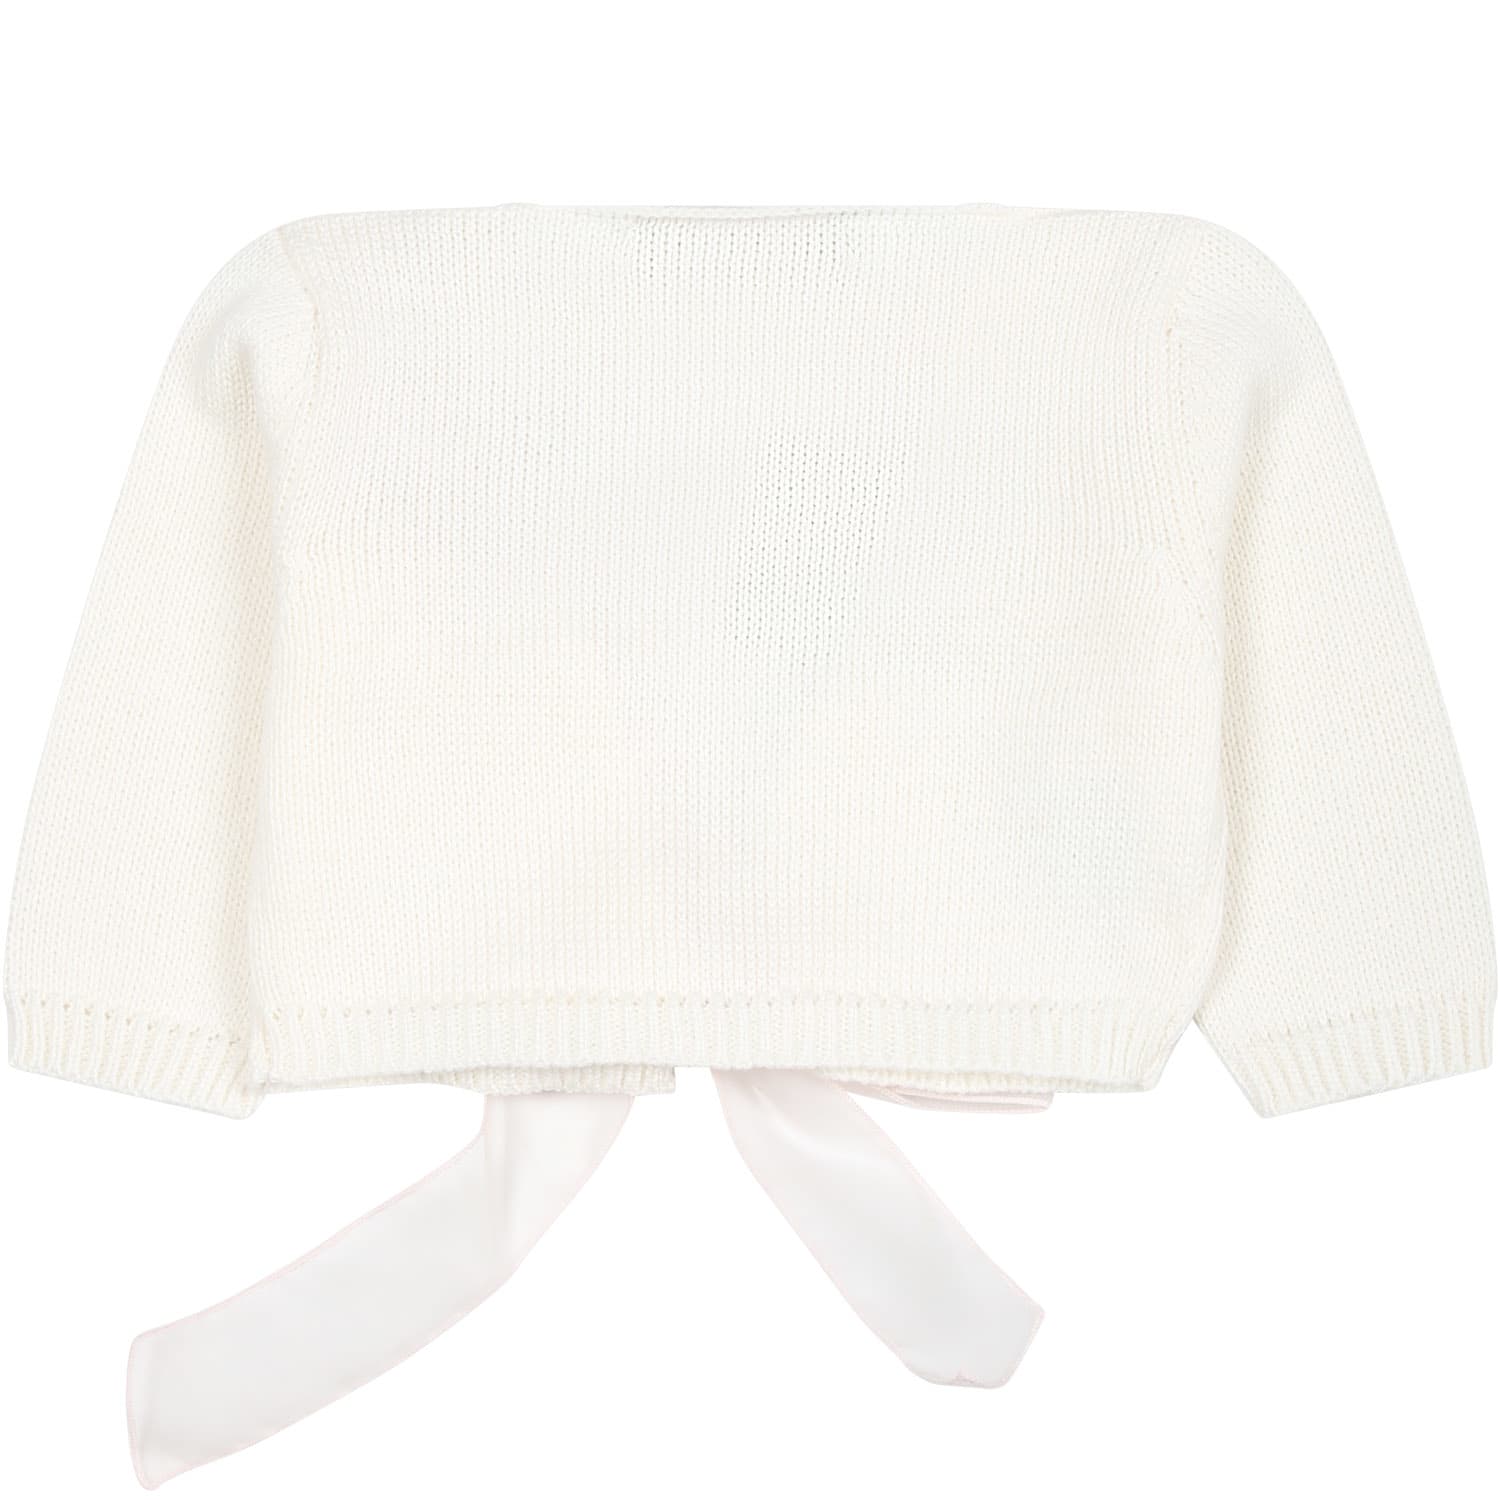 Shop La Stupenderia White Cardigan For Baby Girl With Pink Bow